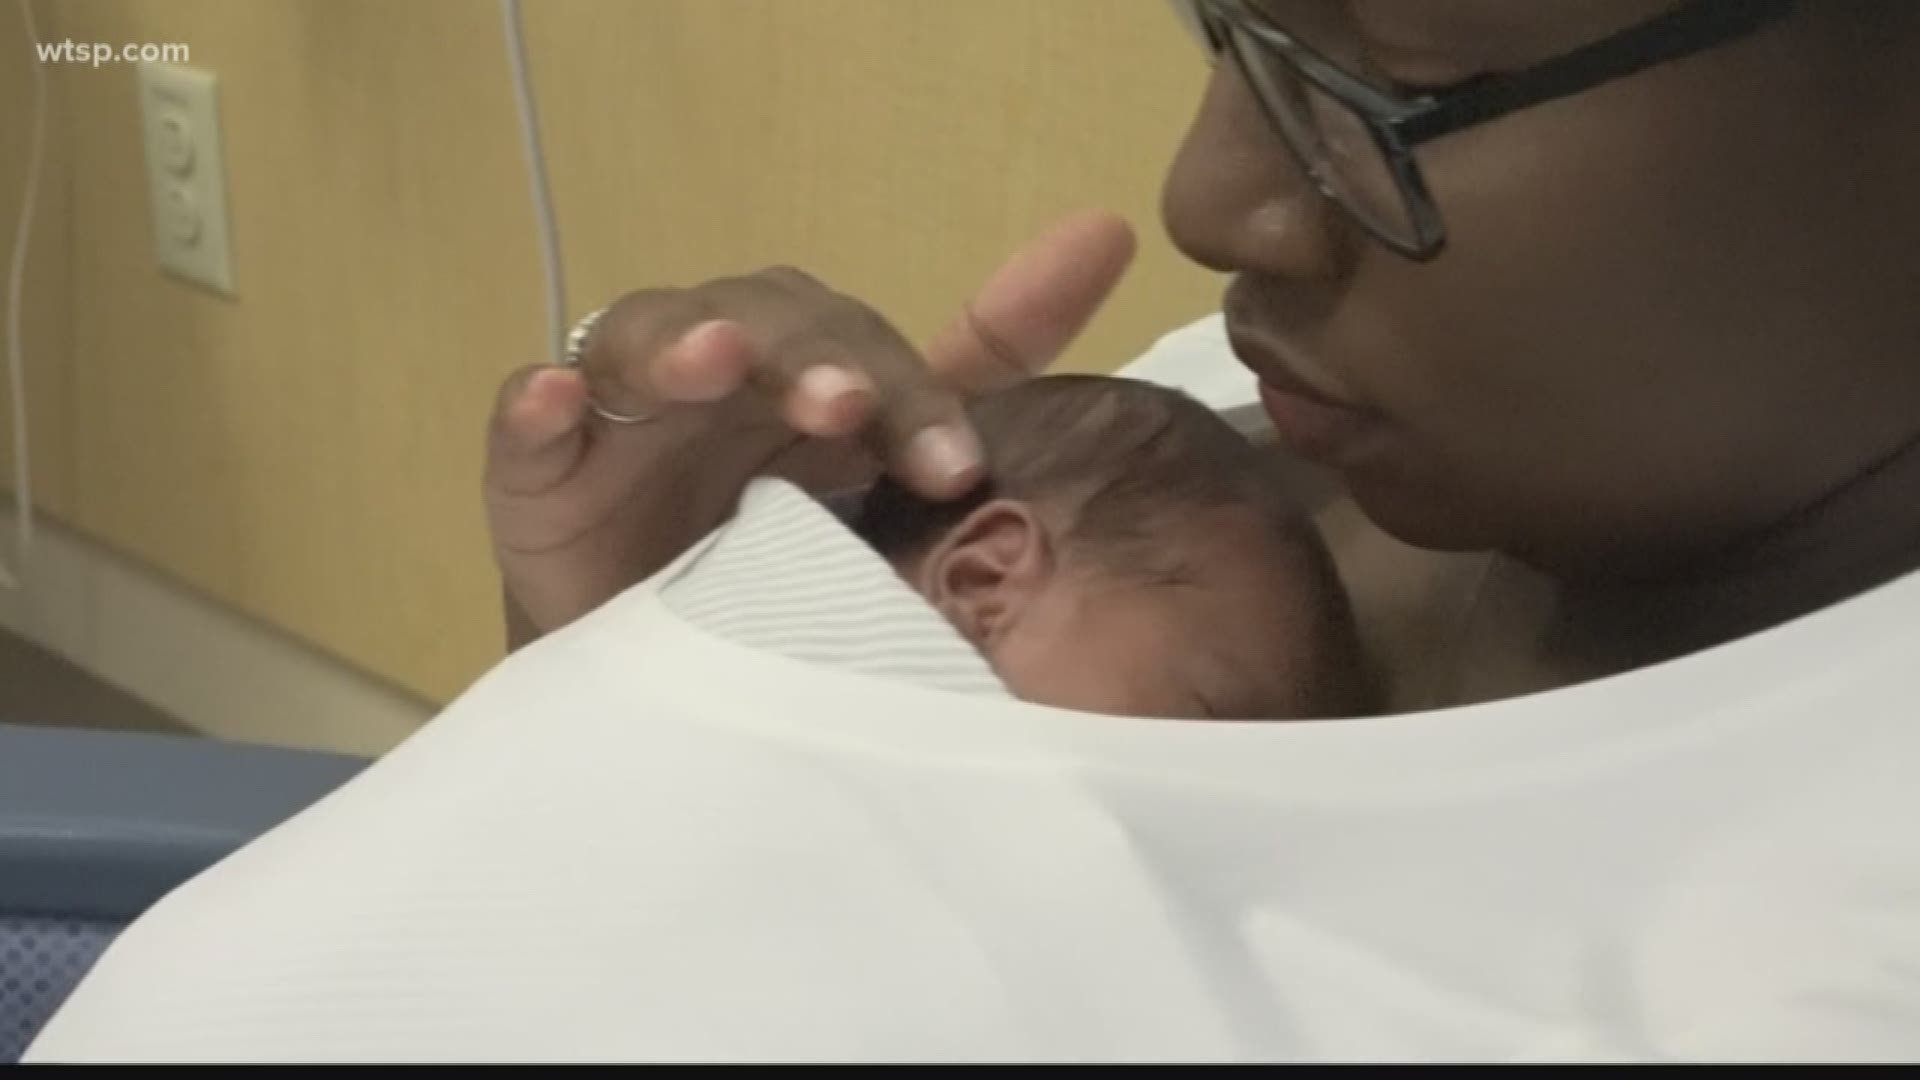 New moms have learned kangaroo care is one of the best ways to bond with a baby. https://on.wtsp.com/2WQbw7p